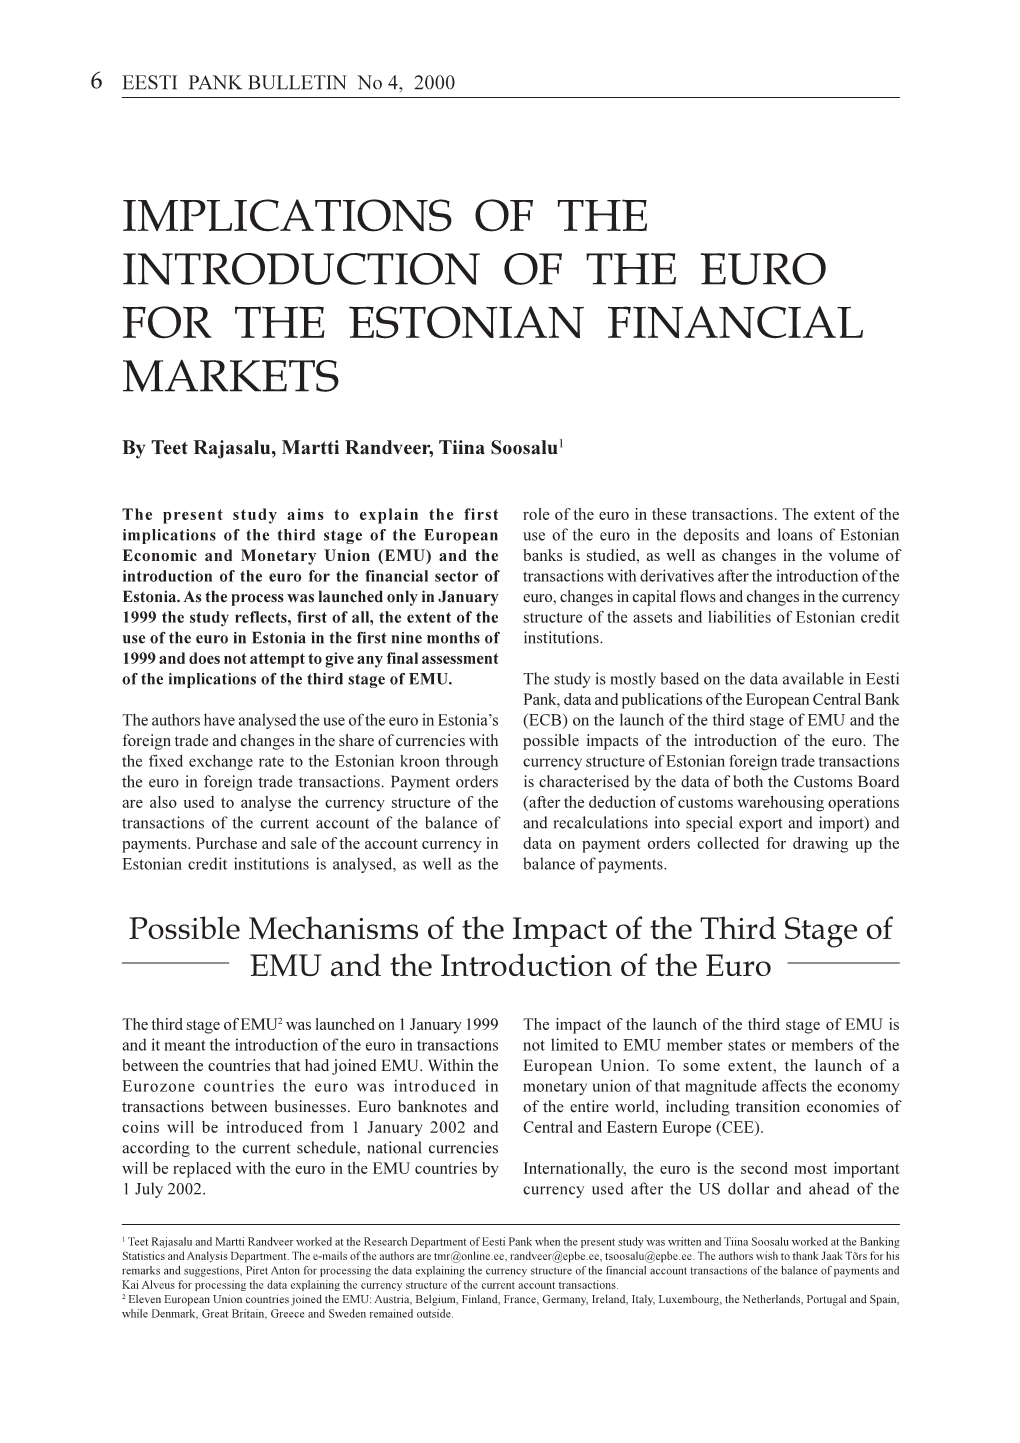 Implications of the Introduction of the Euro for the Estonian Financial Markets